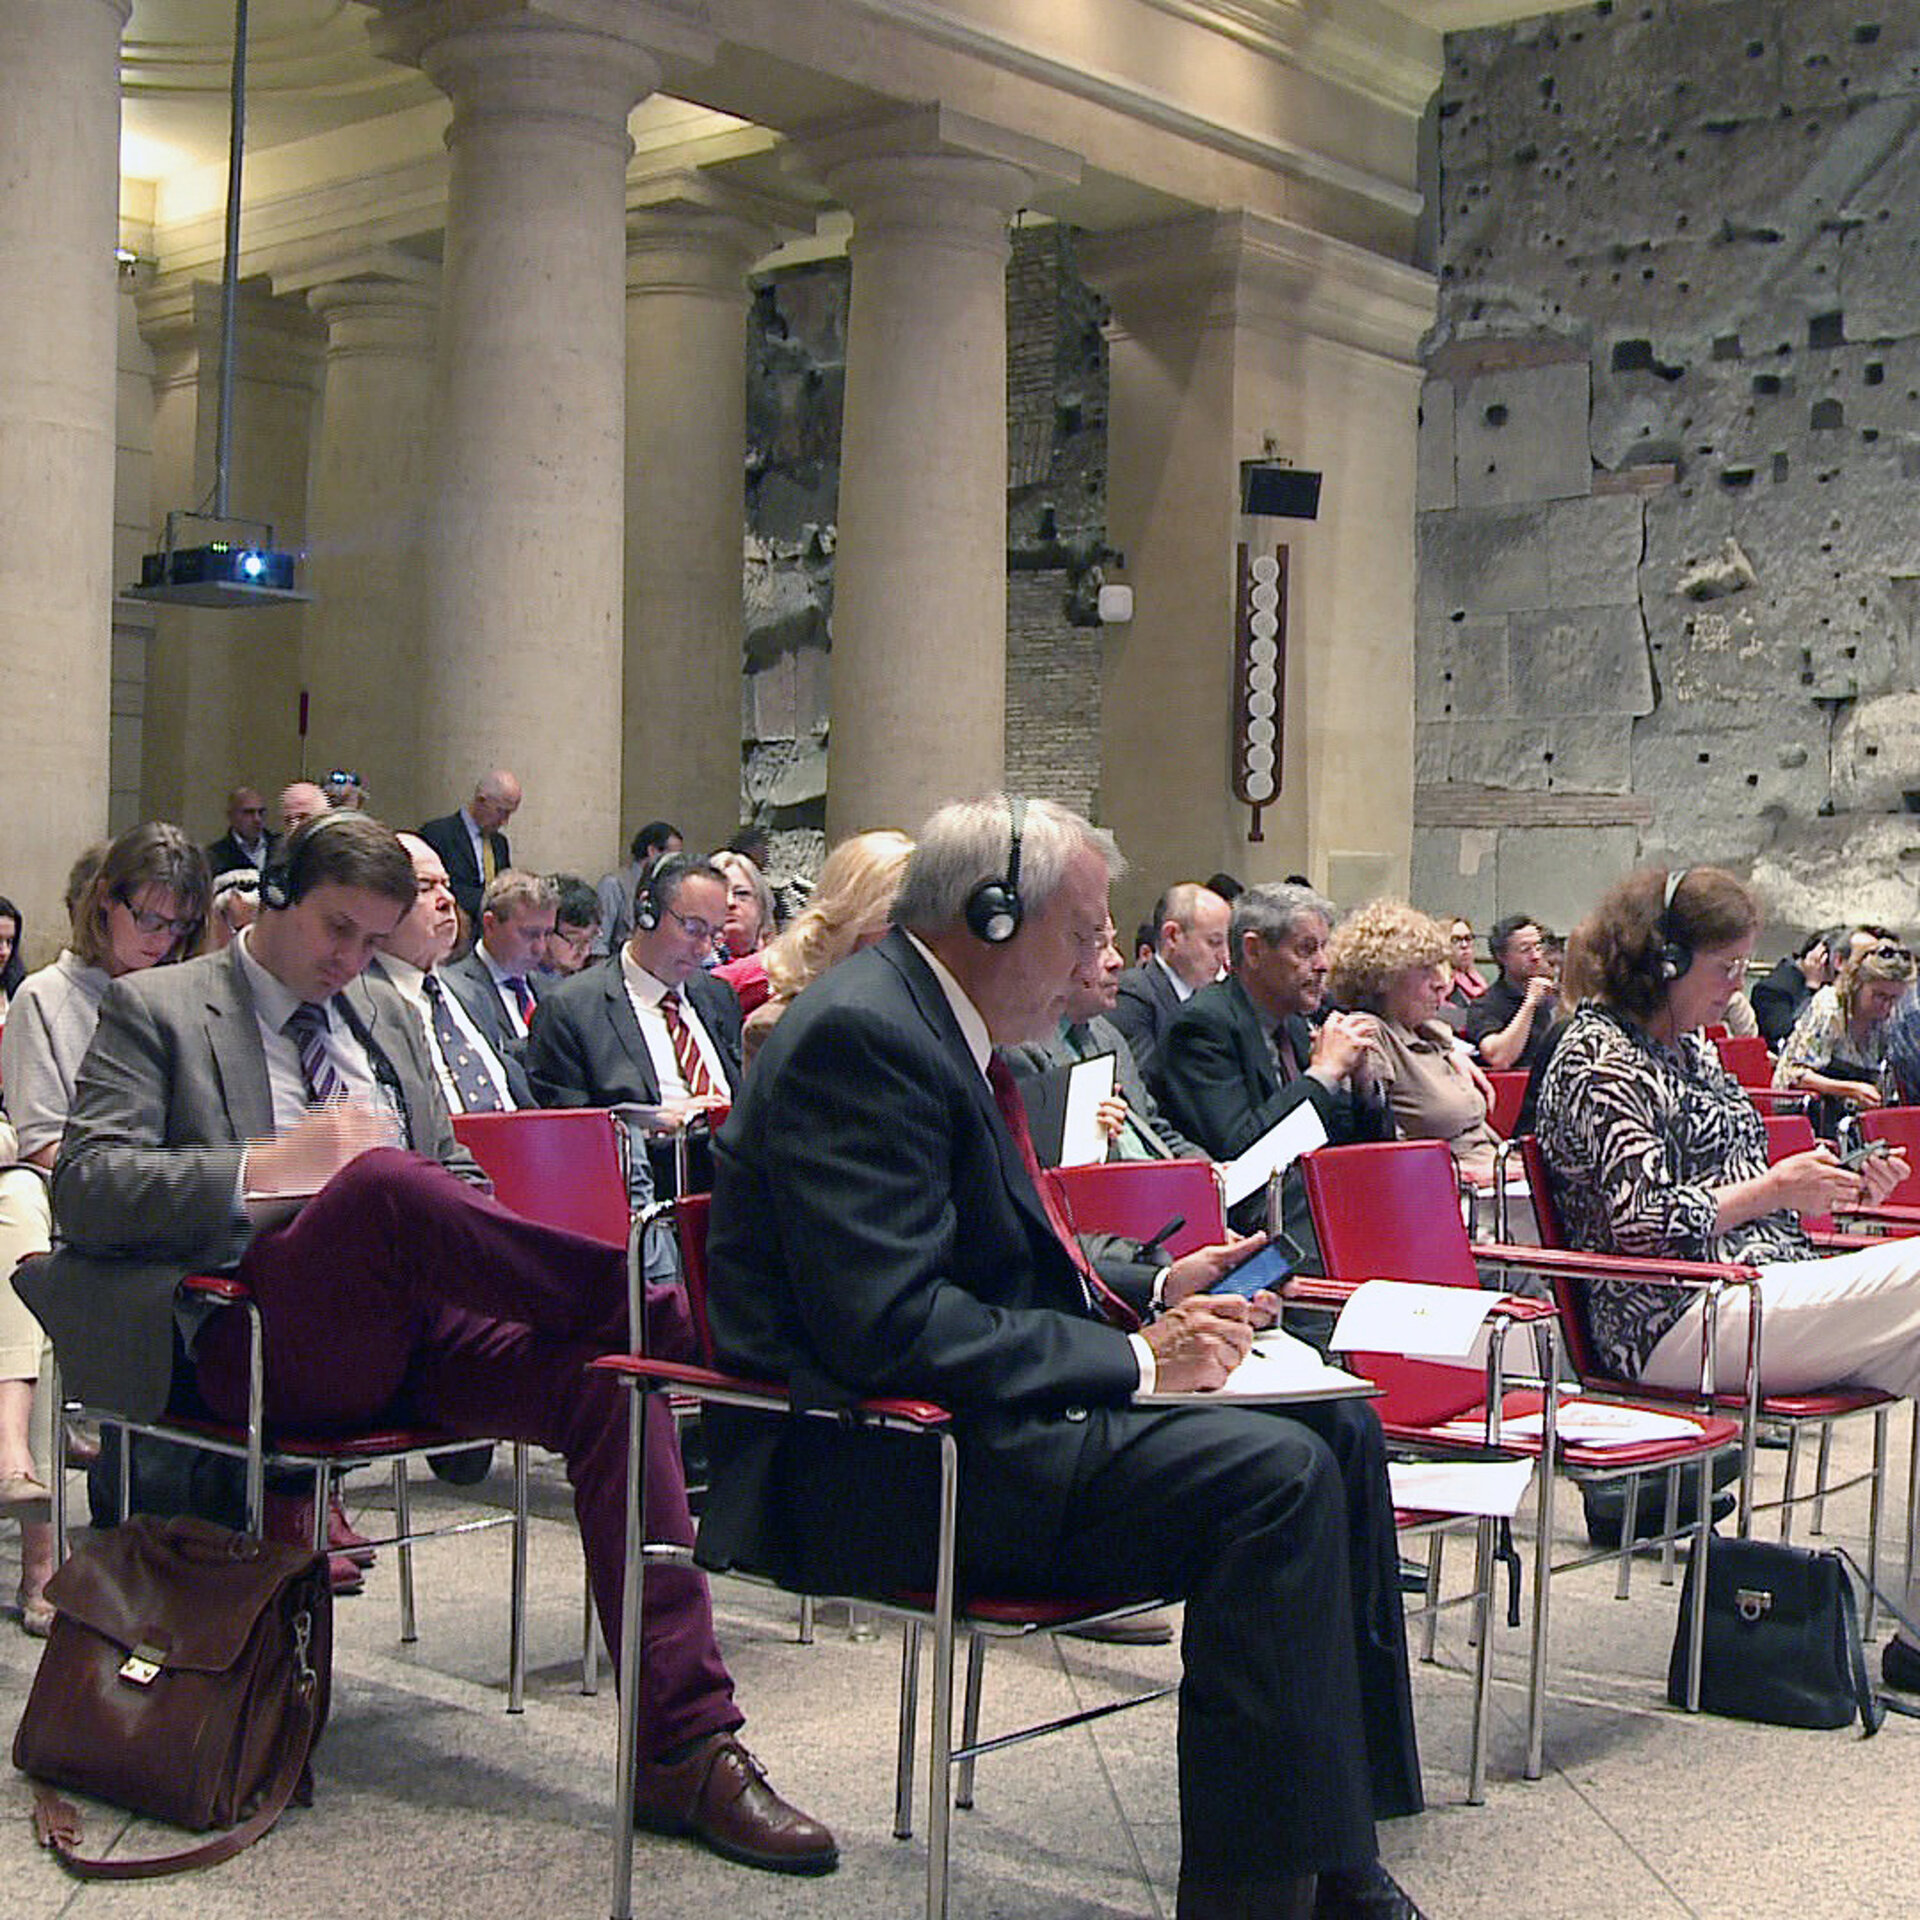 2015 International Symposium on Climate Change in Rome, Italy